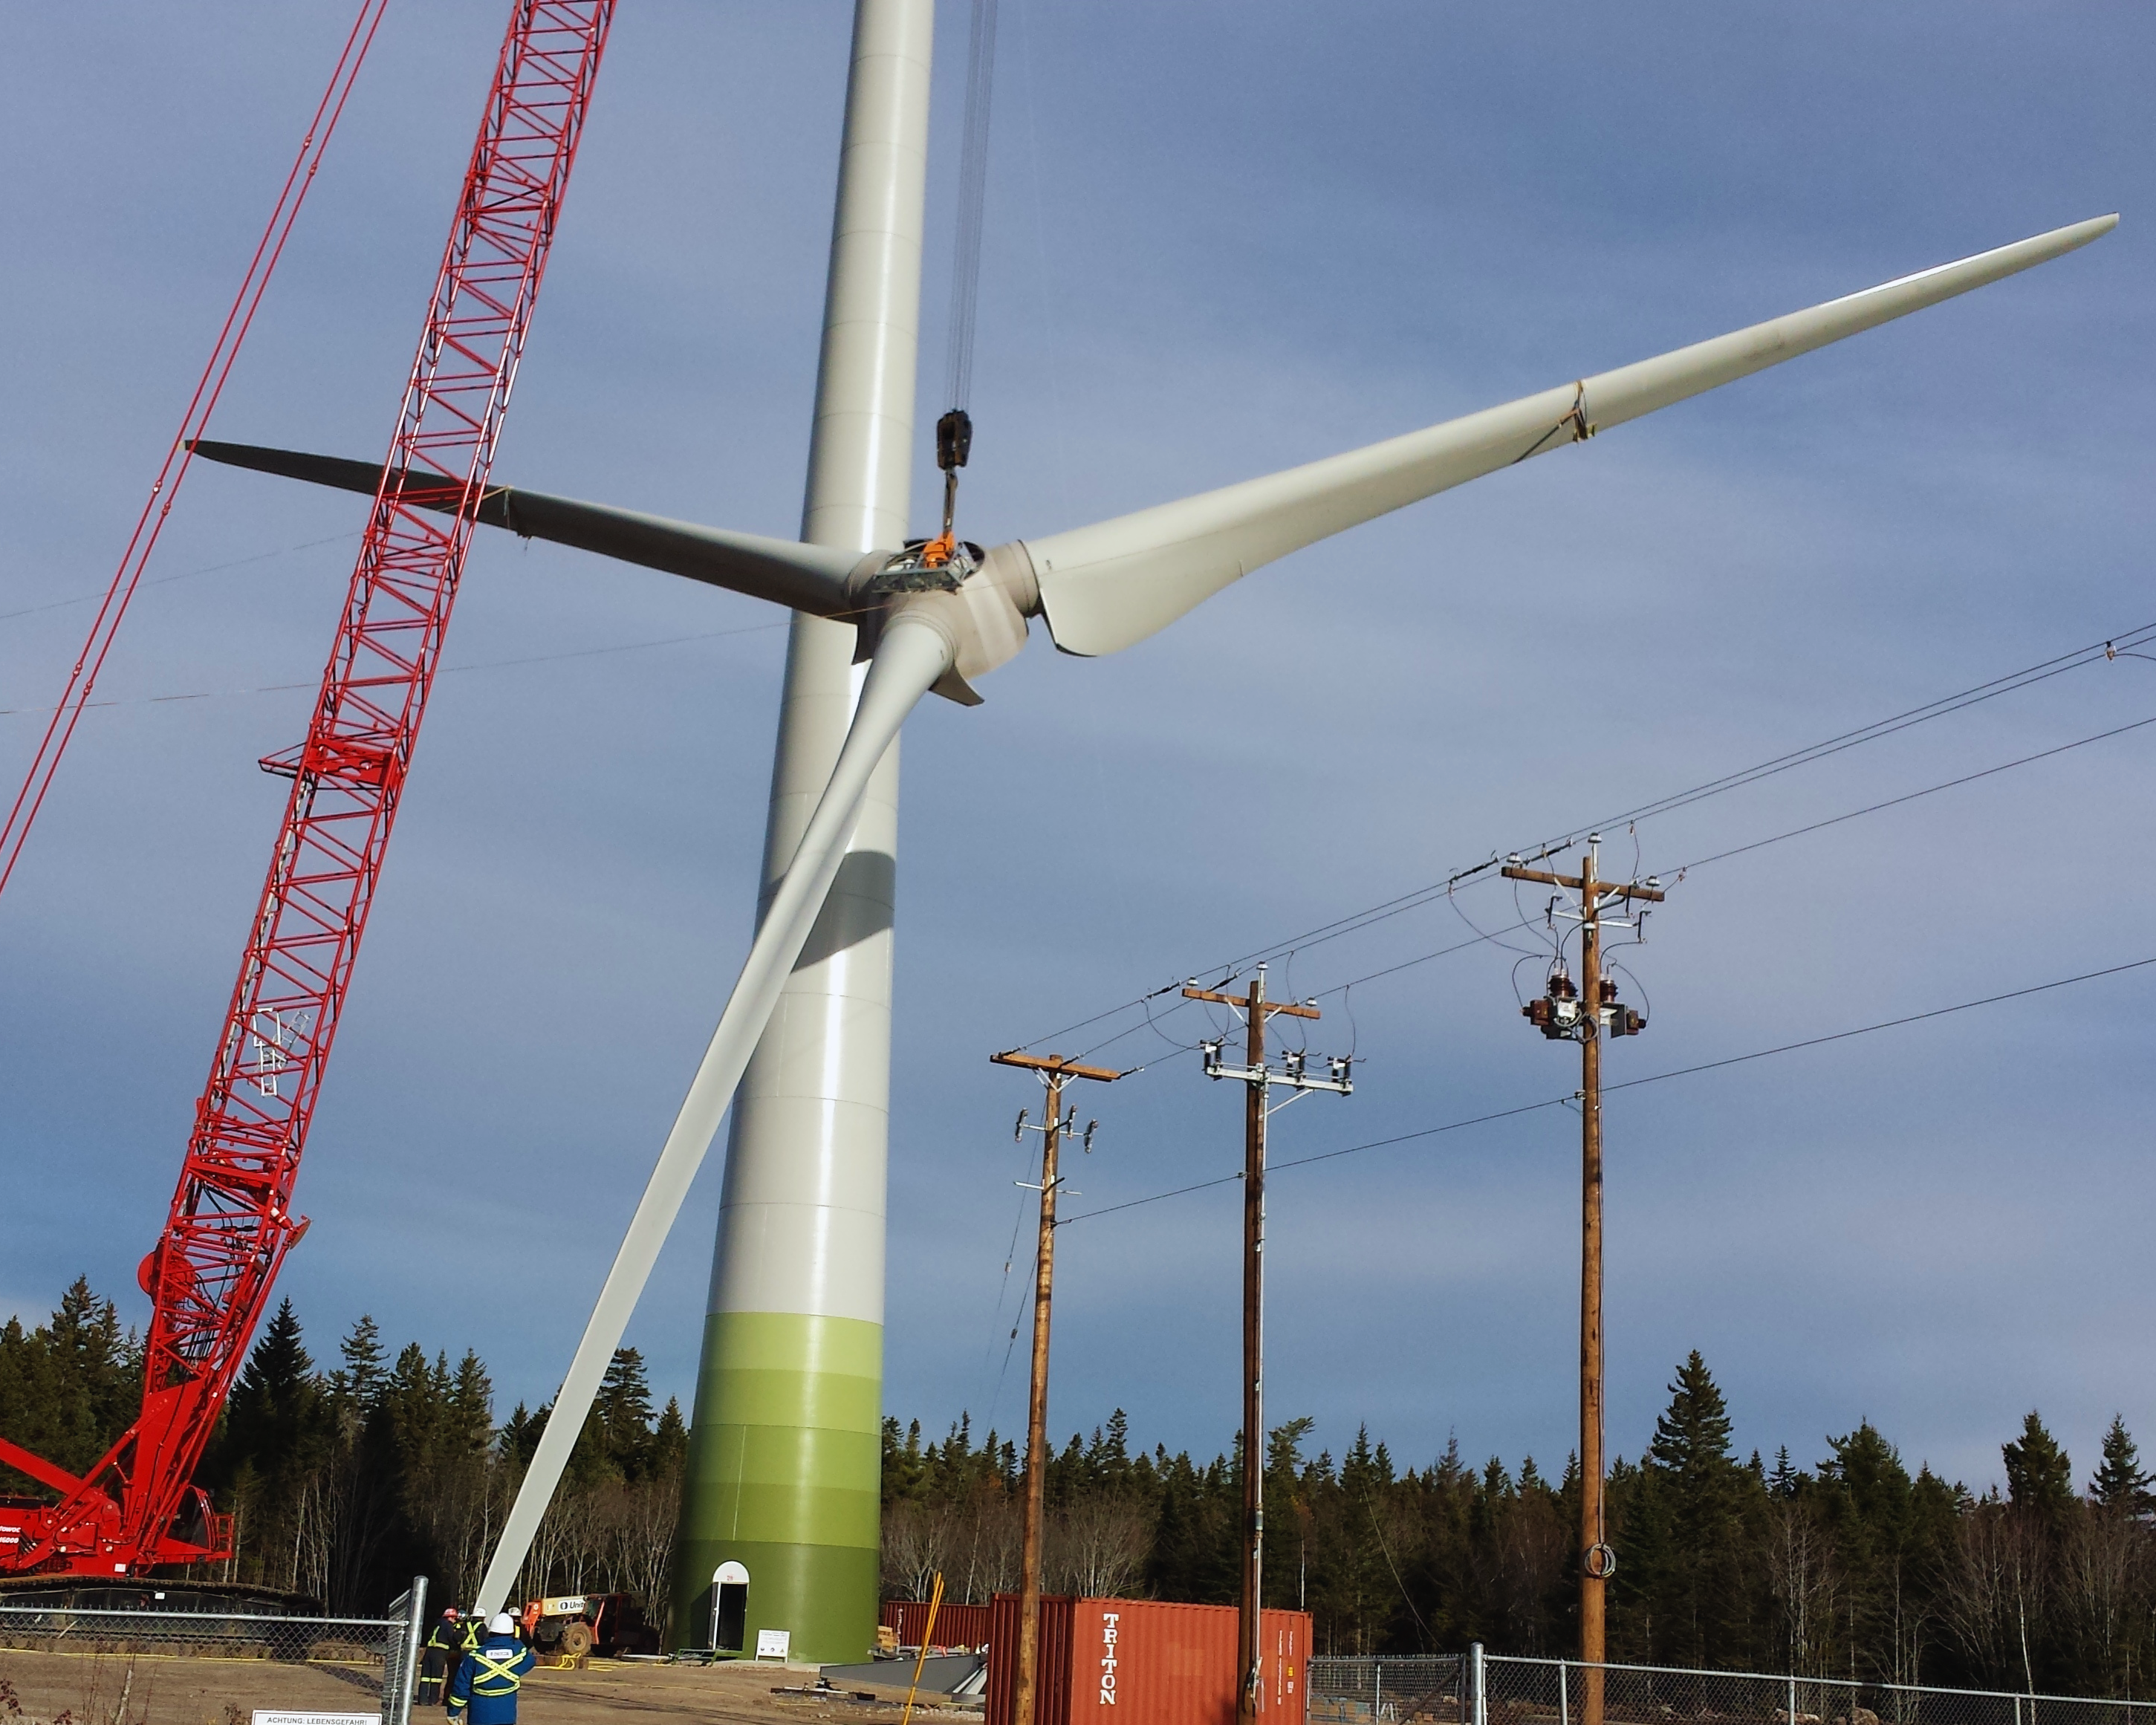 A wind turbine being constructed.